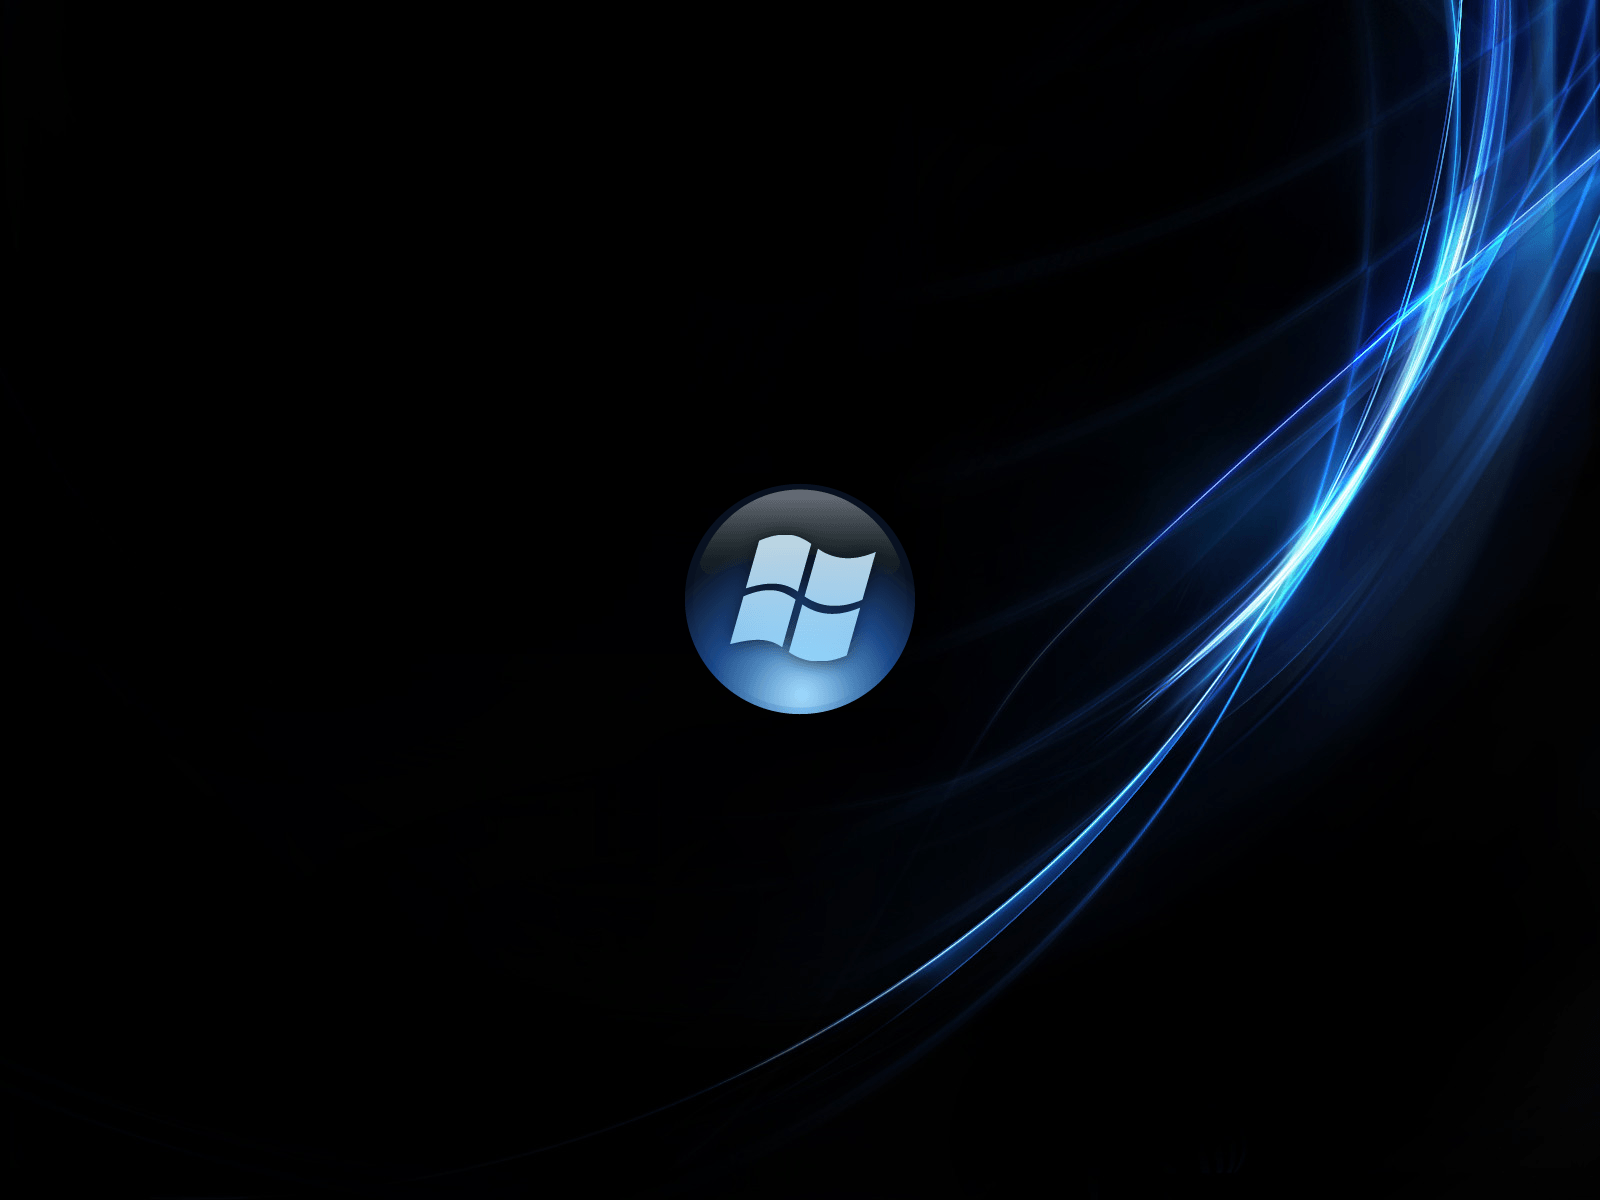 Windows Logo Wallpapers 2 by Tonev